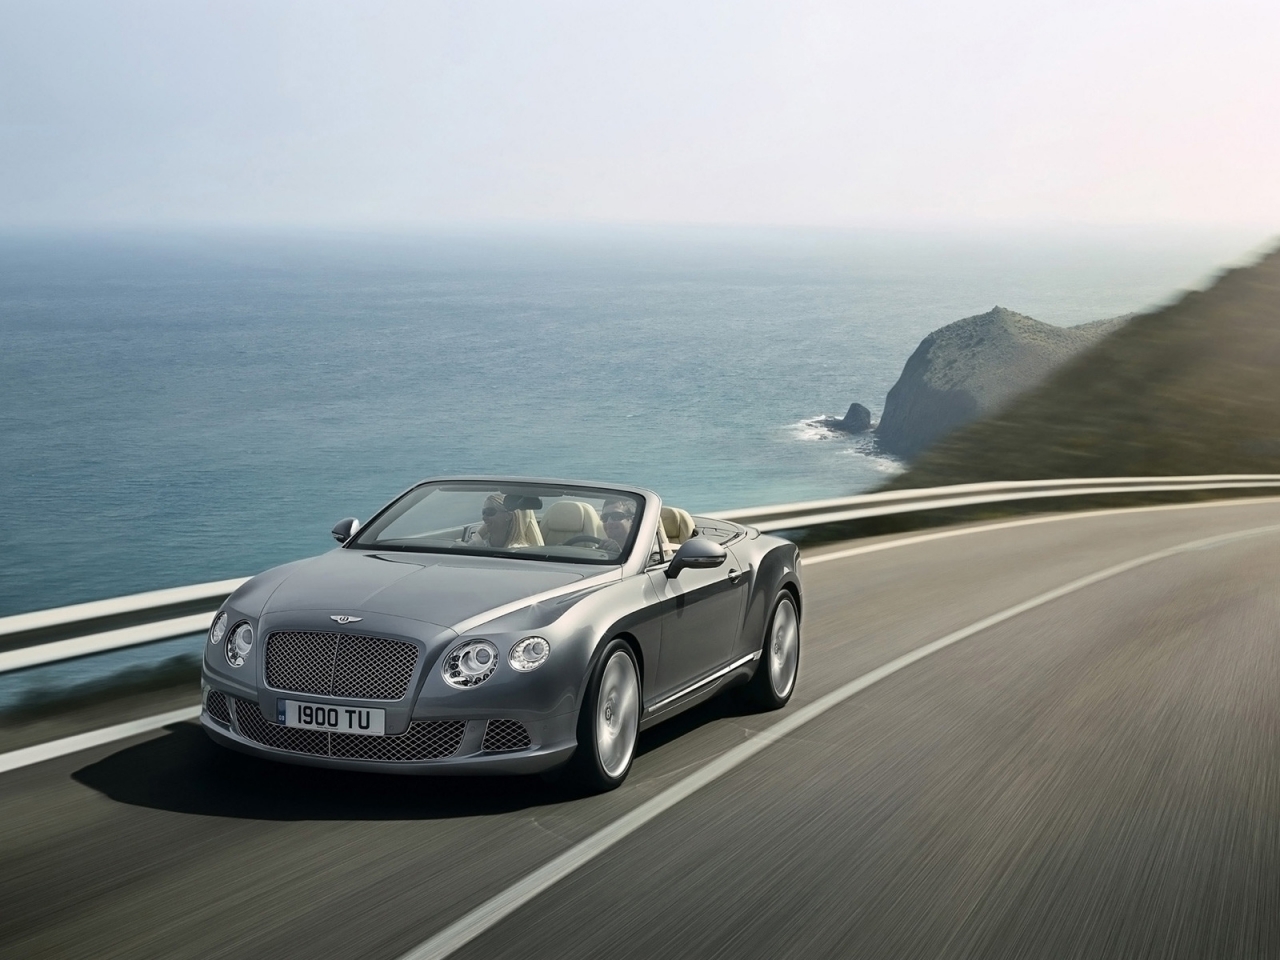 2012 Bentley Continental GTC for 1280 x 960 resolution